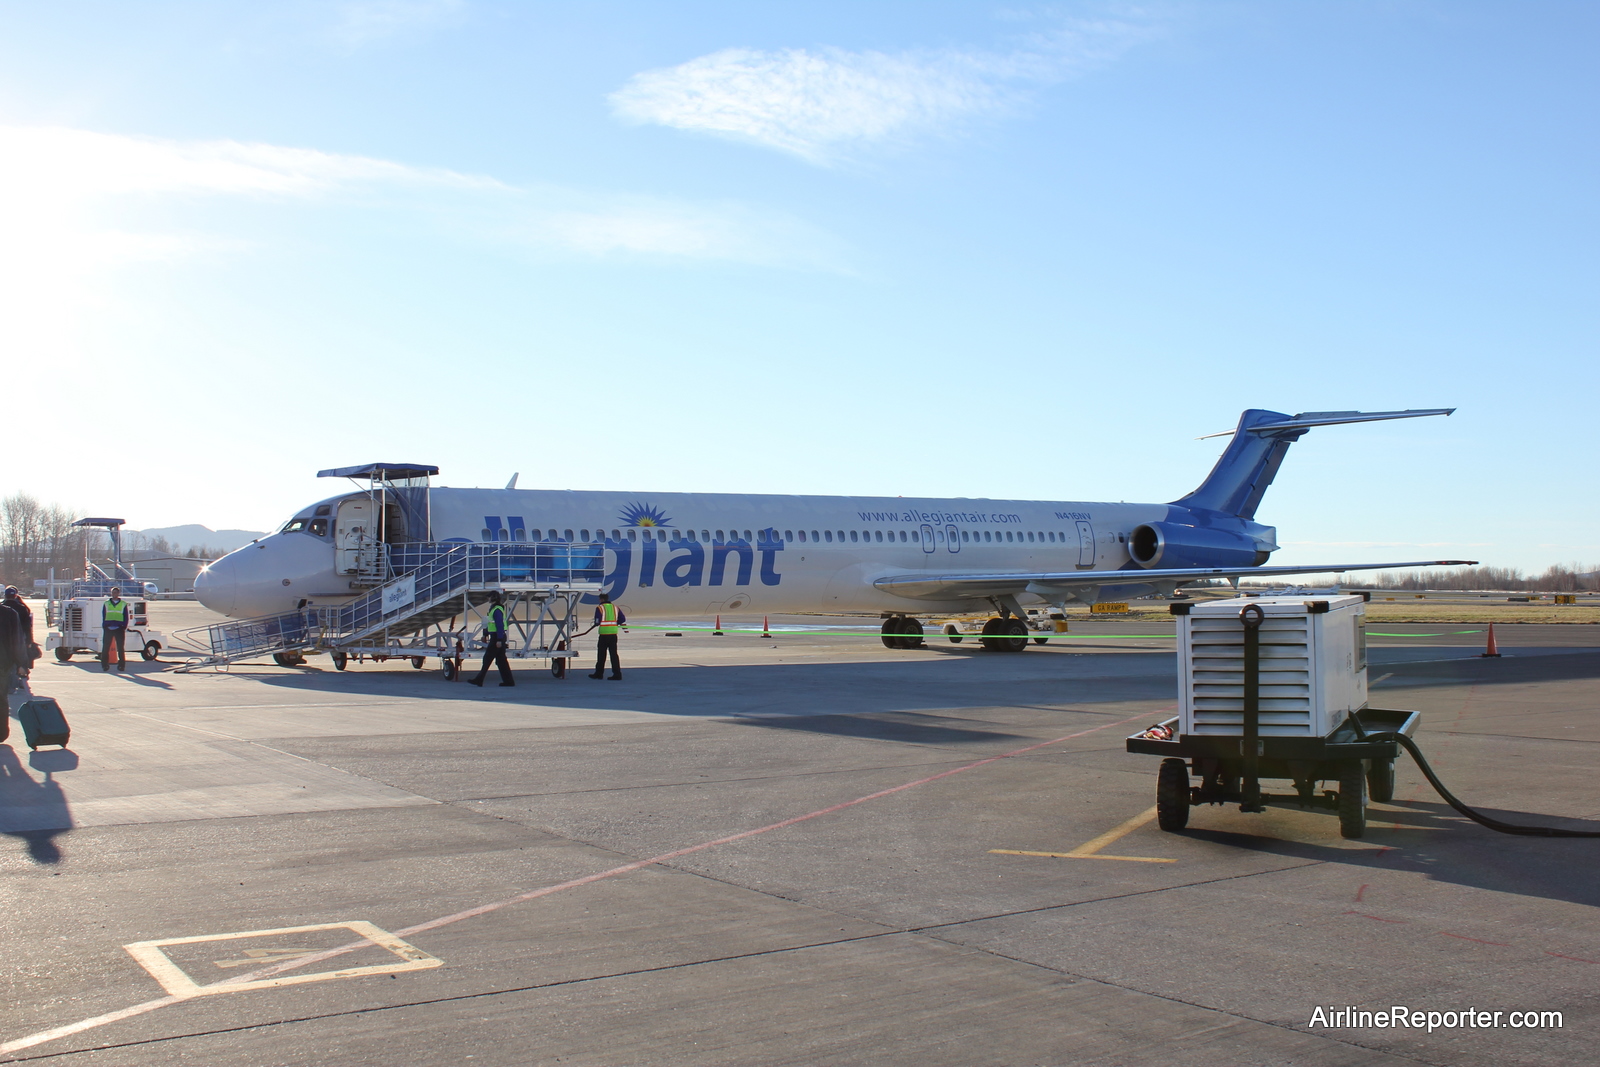 What destinations does Allegiant Air serve from Sanford, Florida?